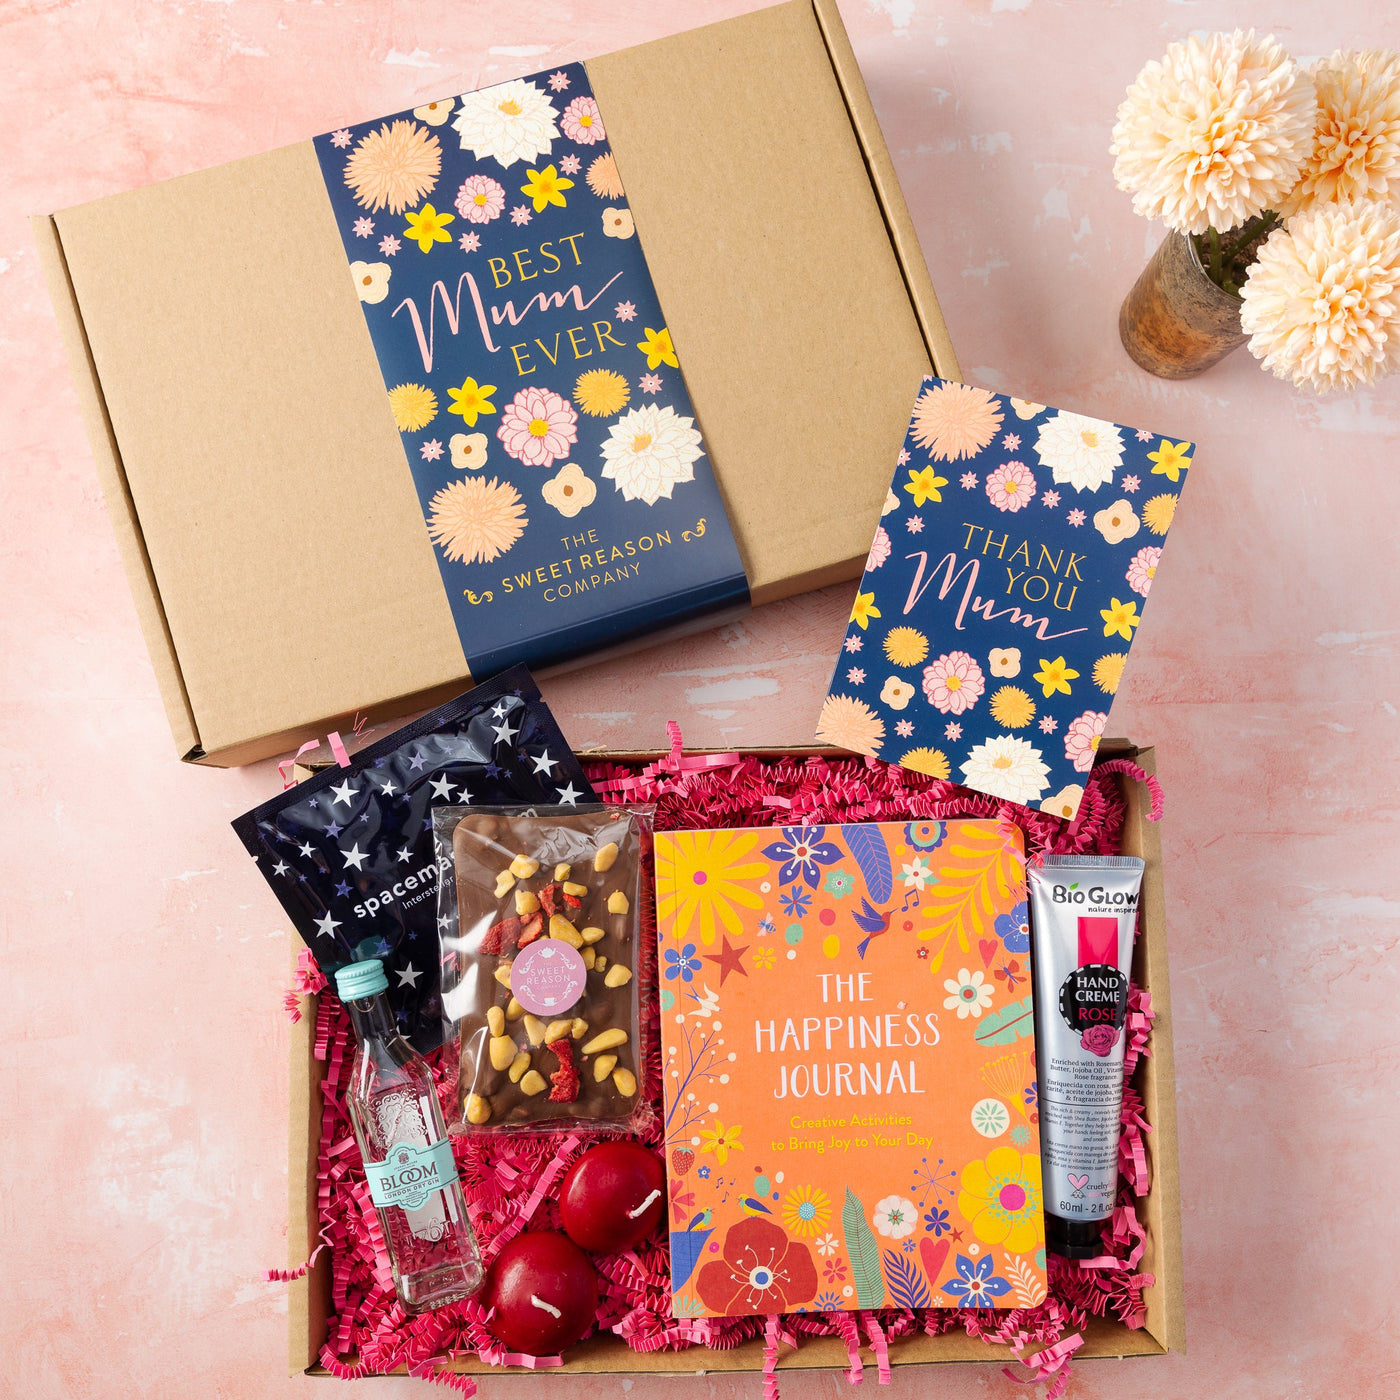 'Best Mum Ever' Vegan Wellbeing and Relaxation Gift